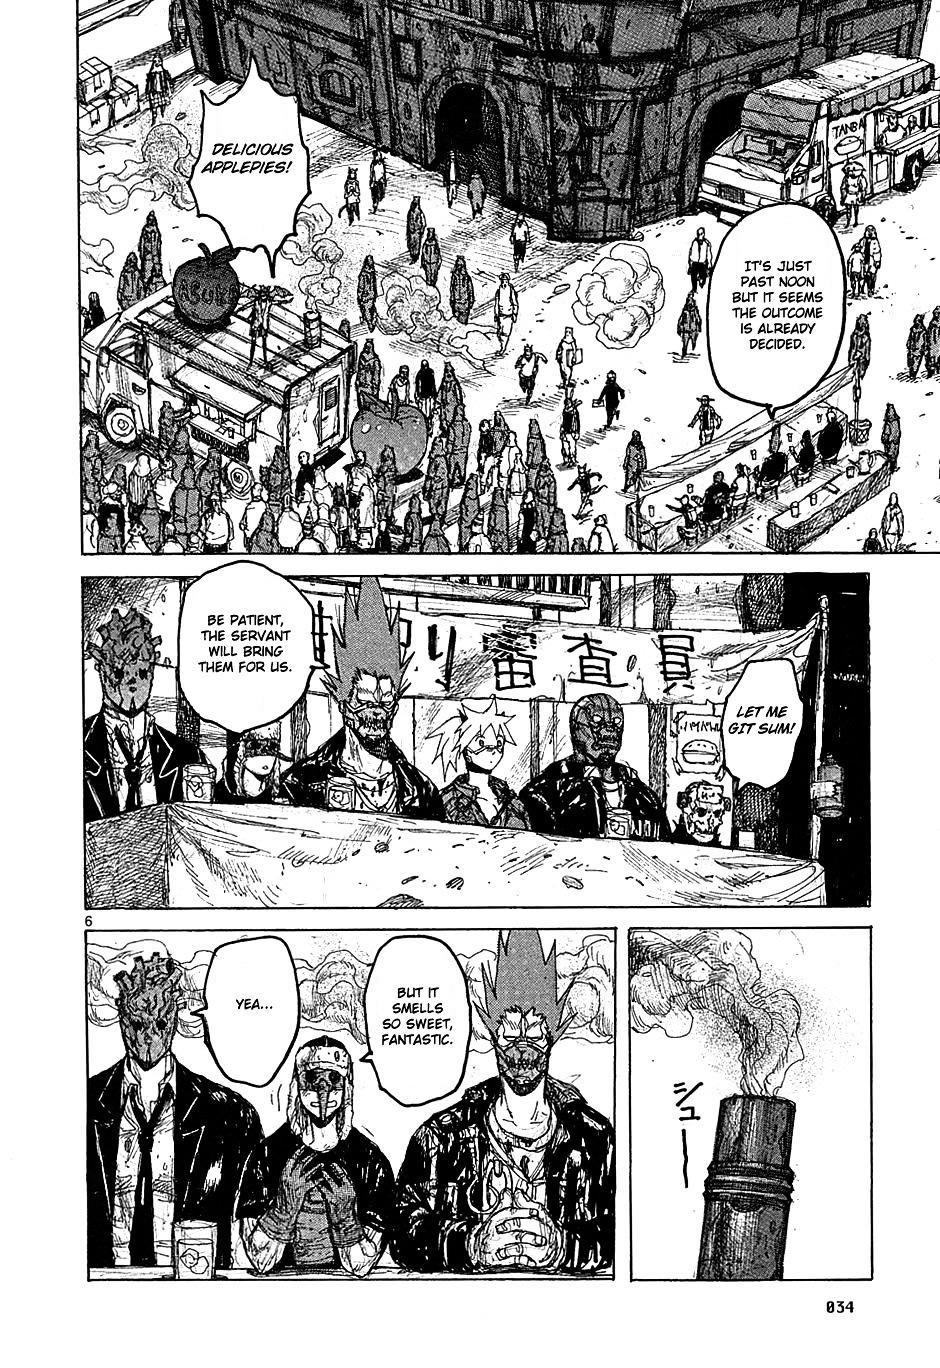 Dorohedoro Chapter 38 : Meatbags Free For All page 6 - Mangakakalot